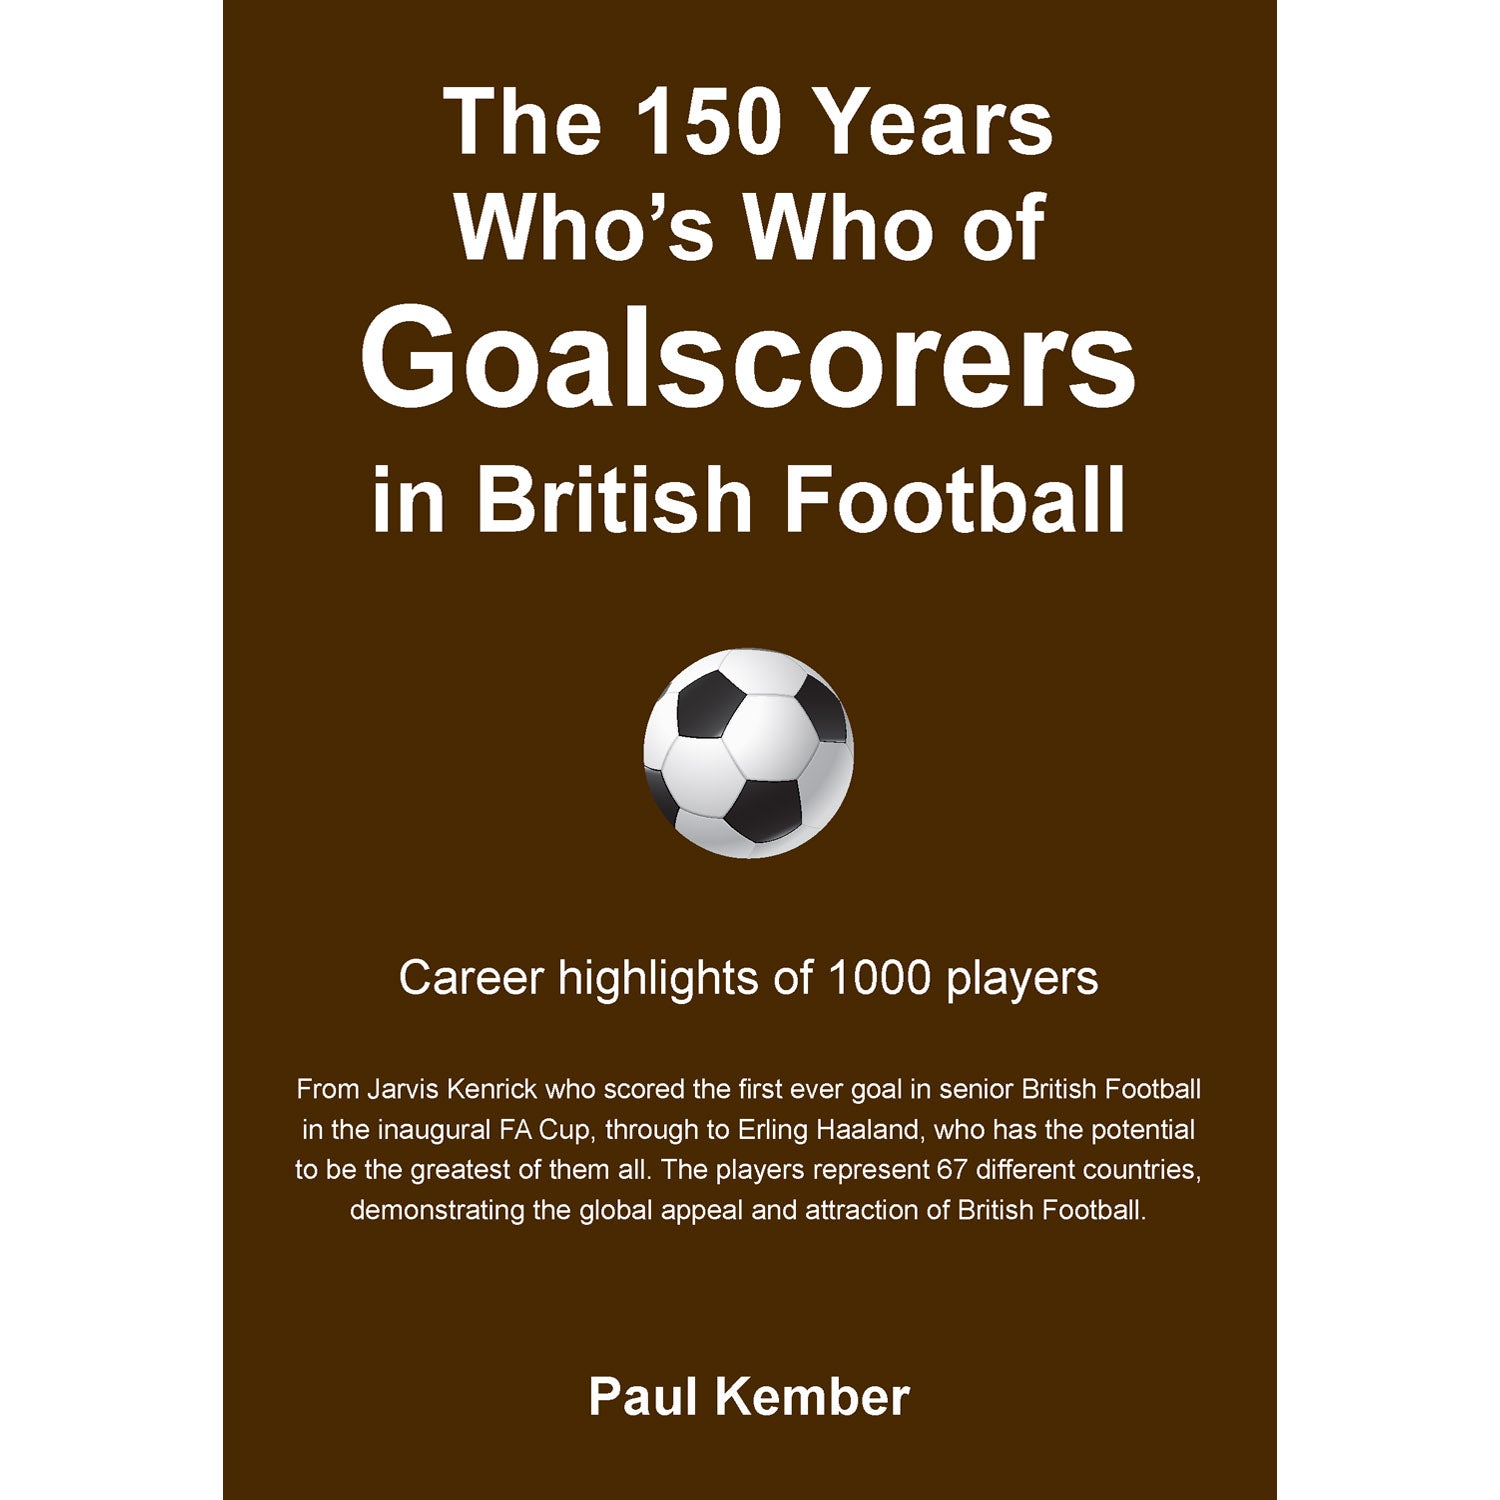 The 150 Years Who's Who of Goalscorers in British Football